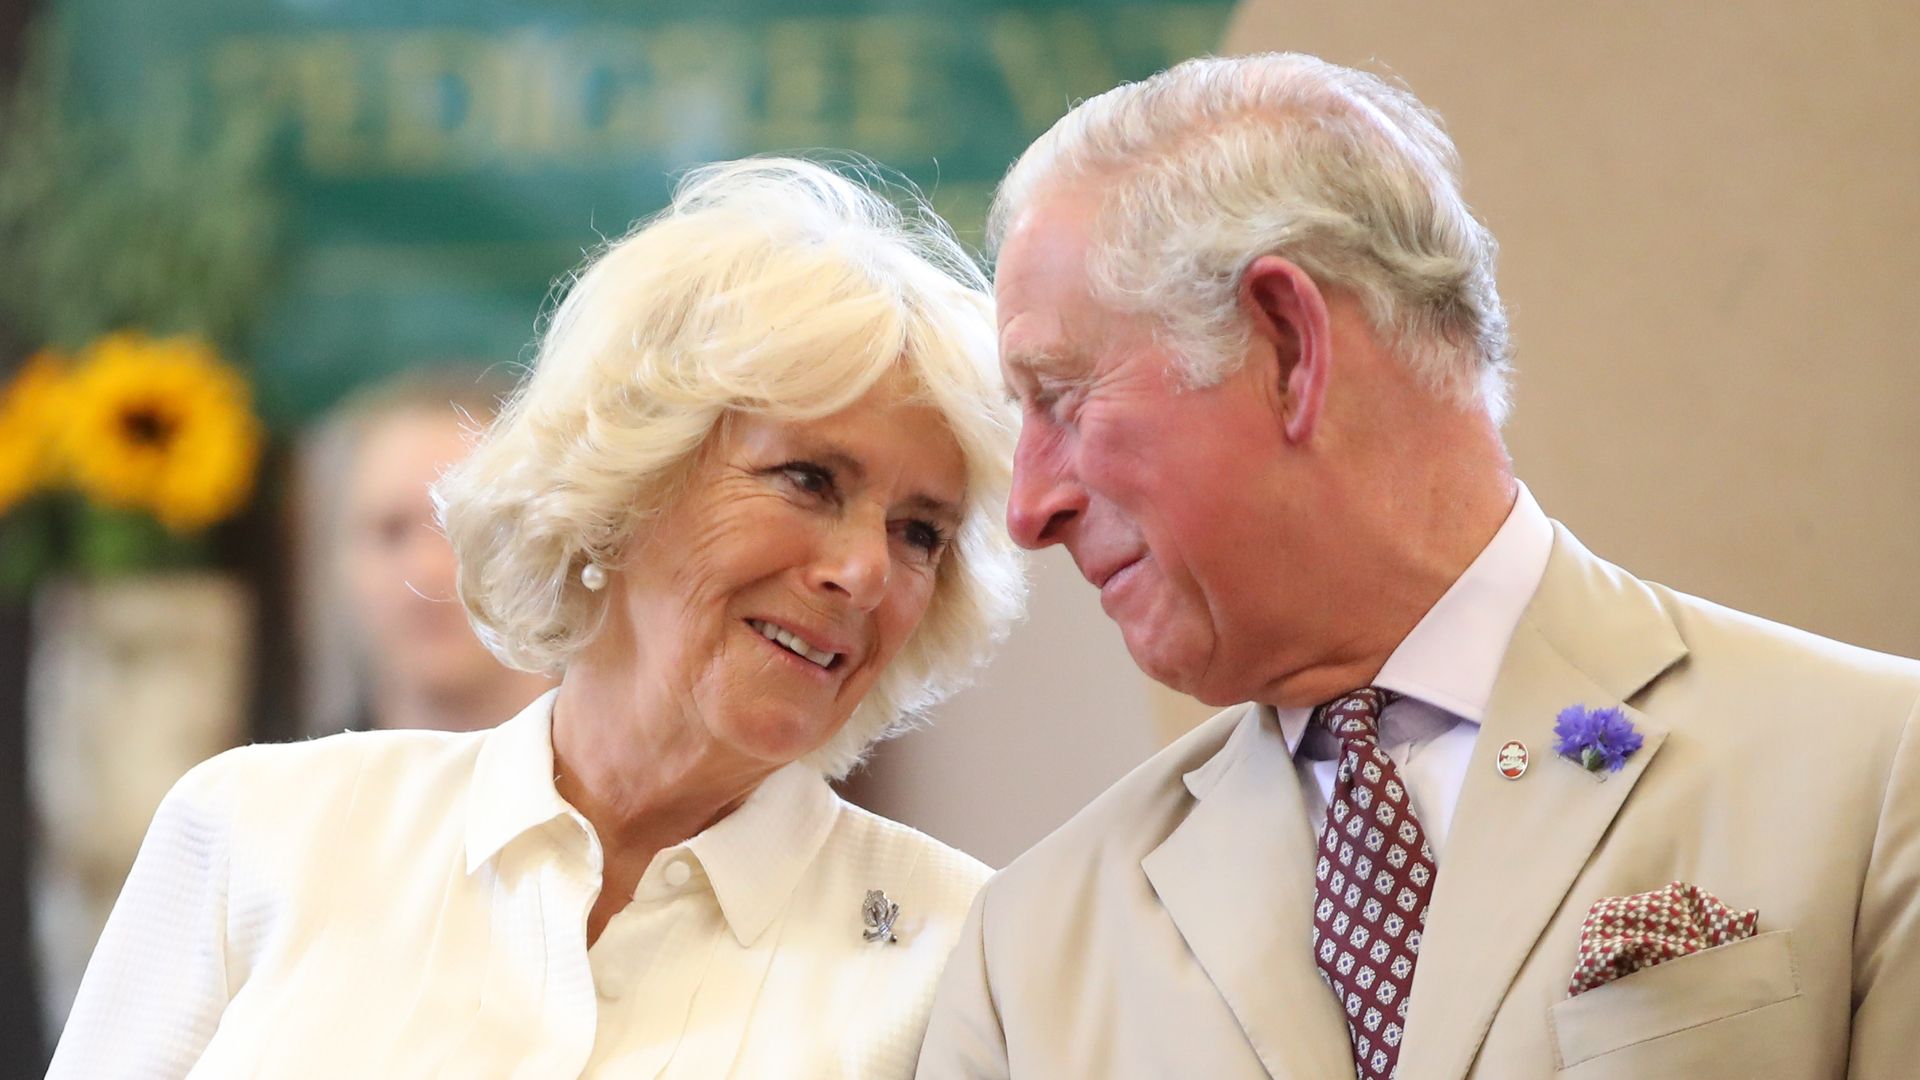 Charles and Camilla look at each other as they reopen the newly-renovated Edwardian community hall The Strand Hall